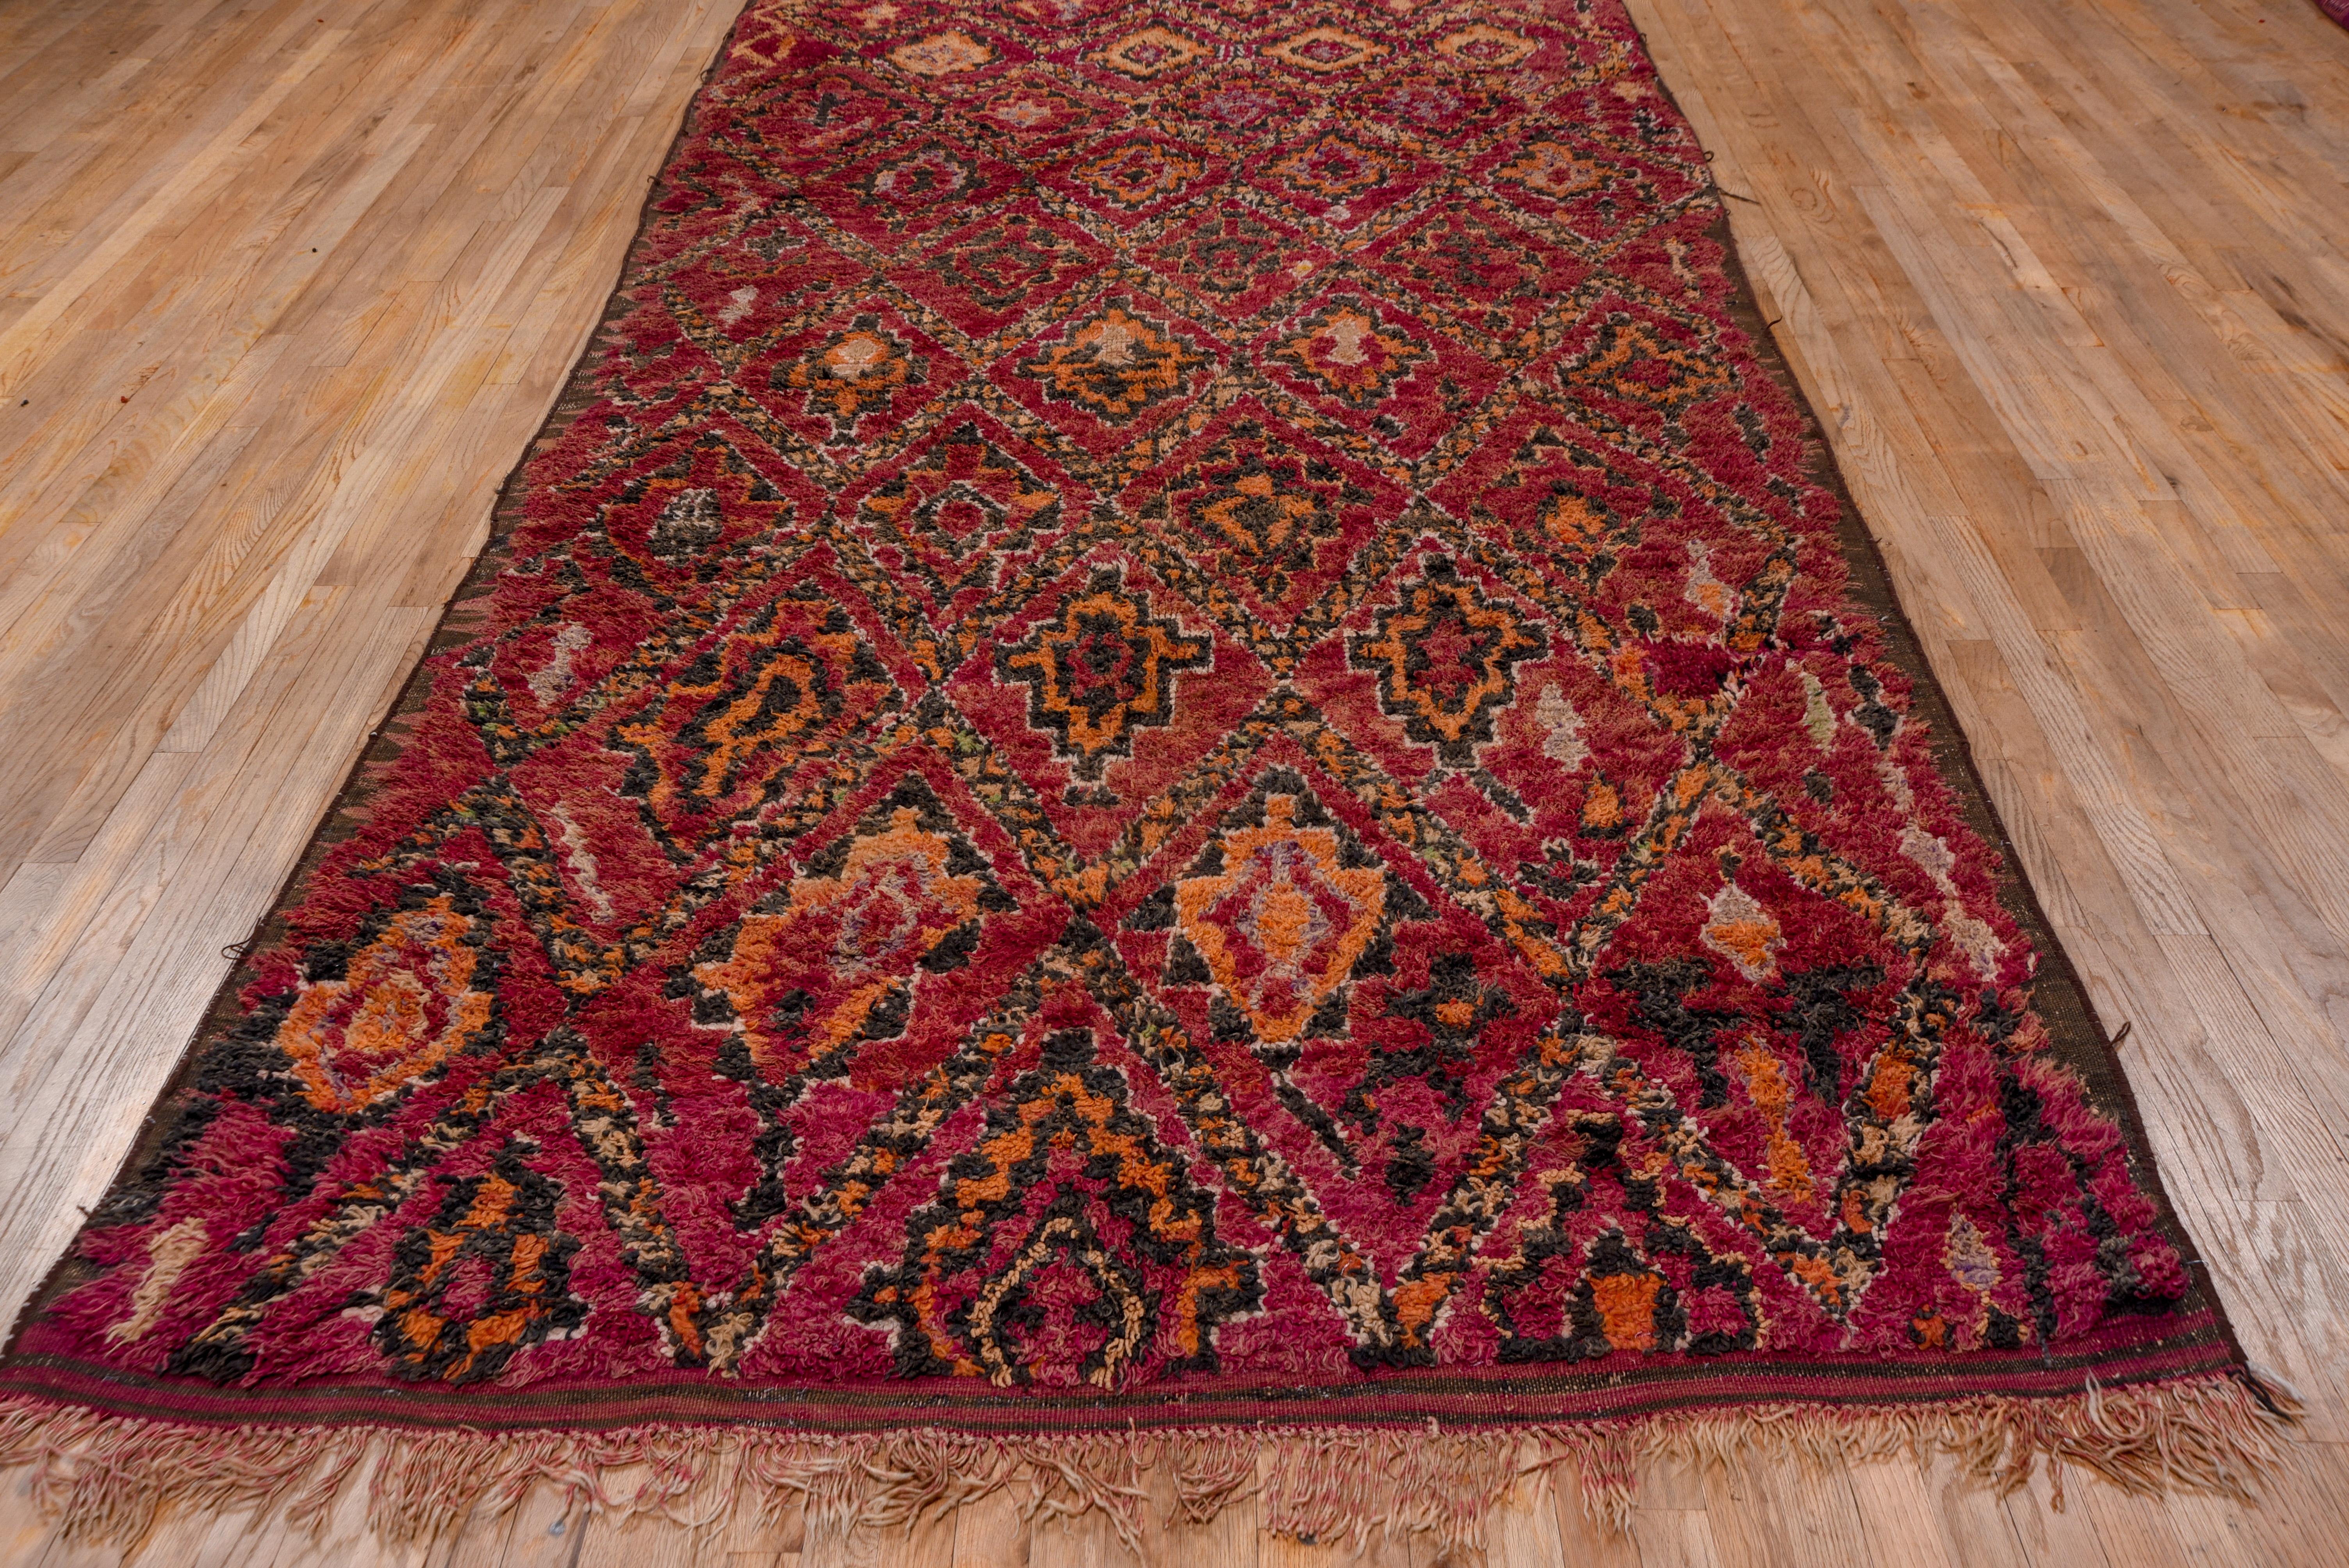 Hand-Knotted Colorful Vintage Moroccan Gallery Carpet, Tribal Pattern, Boho Chic For Sale